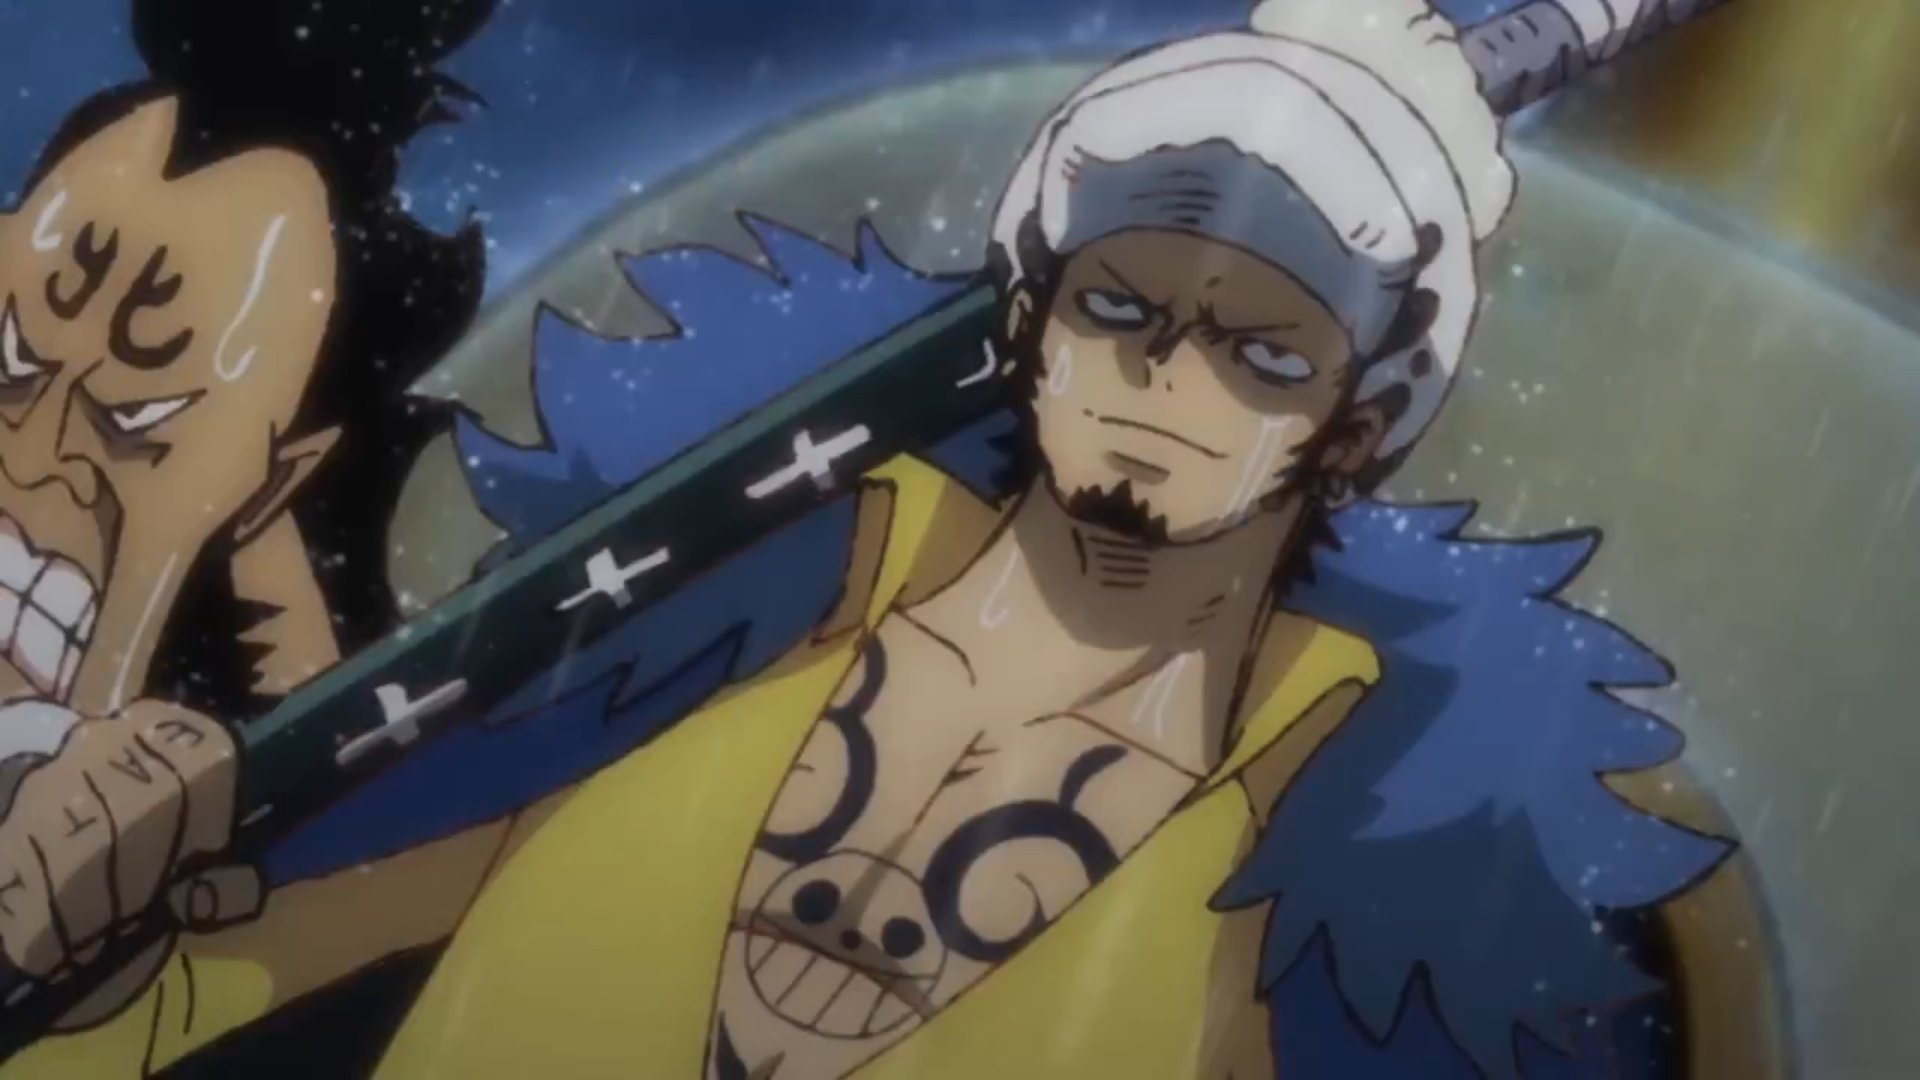 Daily Trafalgar Law How Can We Deal With His Prestige And His Beauty Law Is The Best Without A Doubt One Piece Episode 978 Trafalgarlaw Onepiece Law トラファルガー ロー Onepiece978